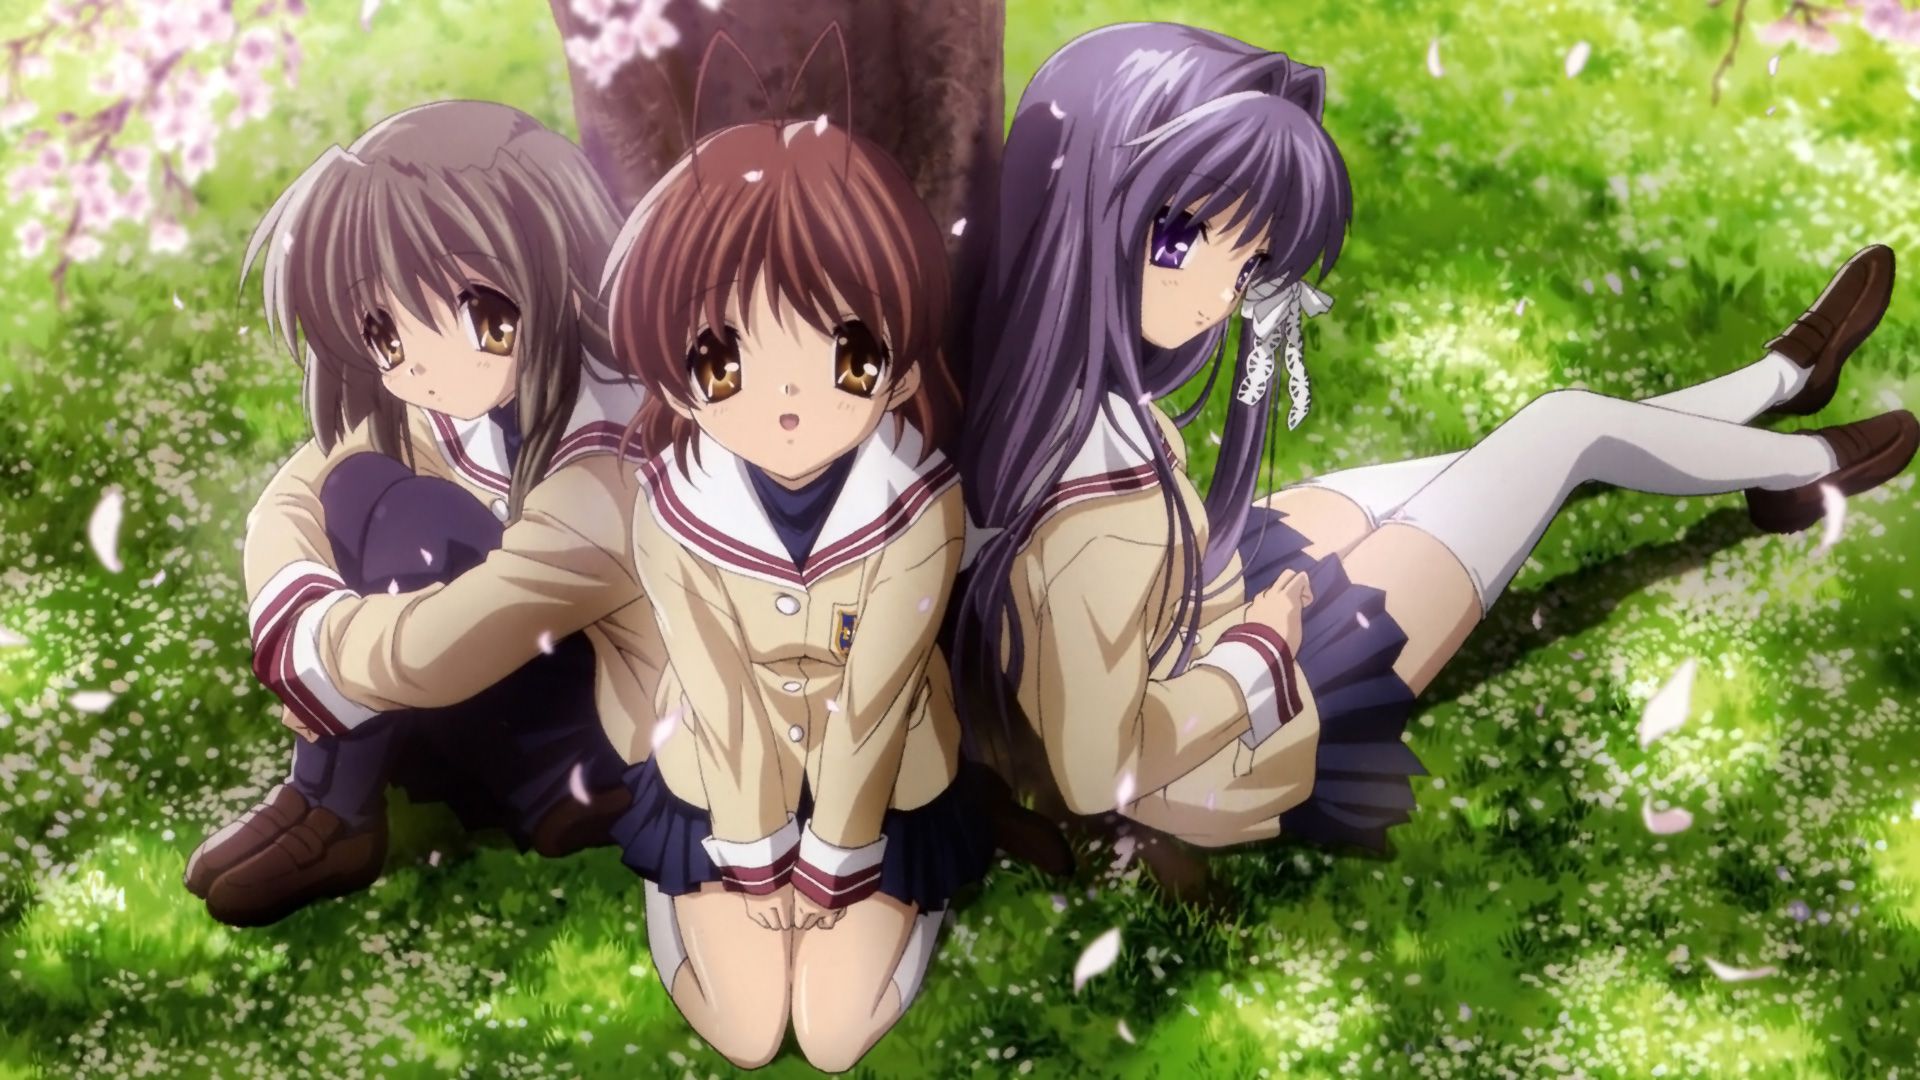 More images for clannad anime wallpaper.